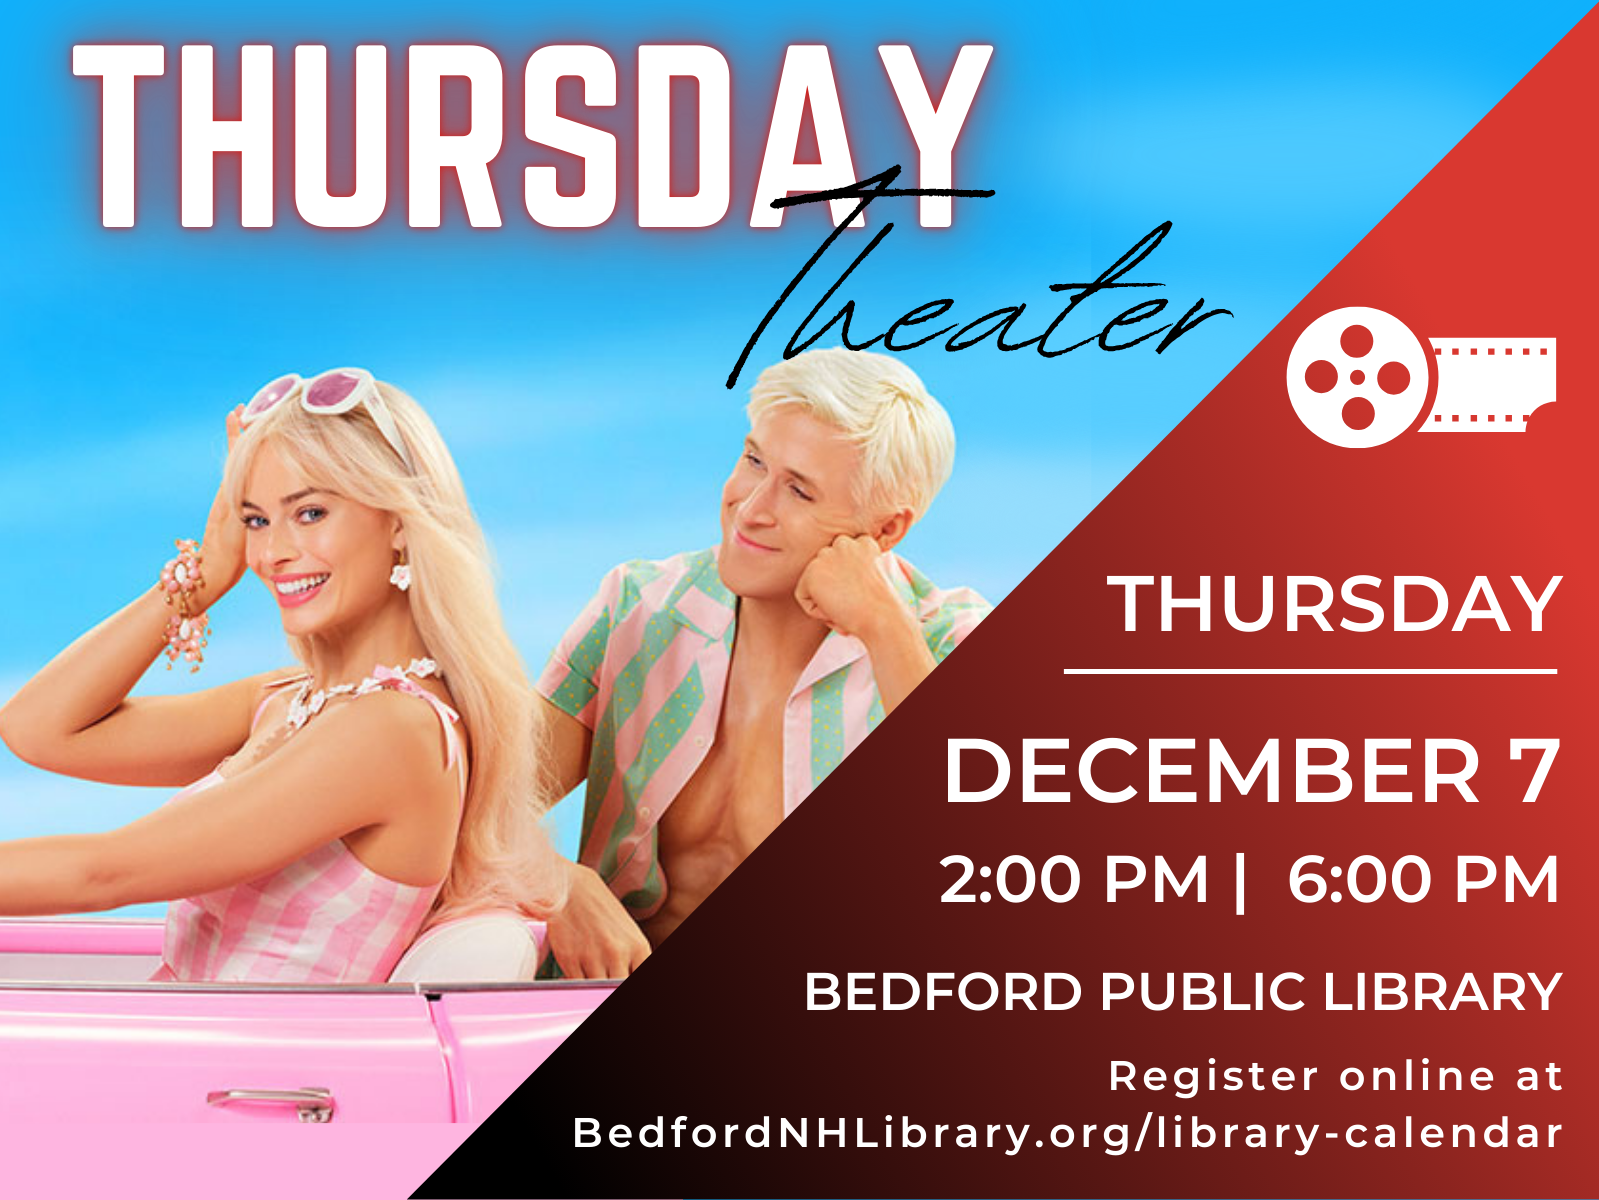 Thursday Theater presents Barbie on December 7 at 2:00pm and 6:00pm